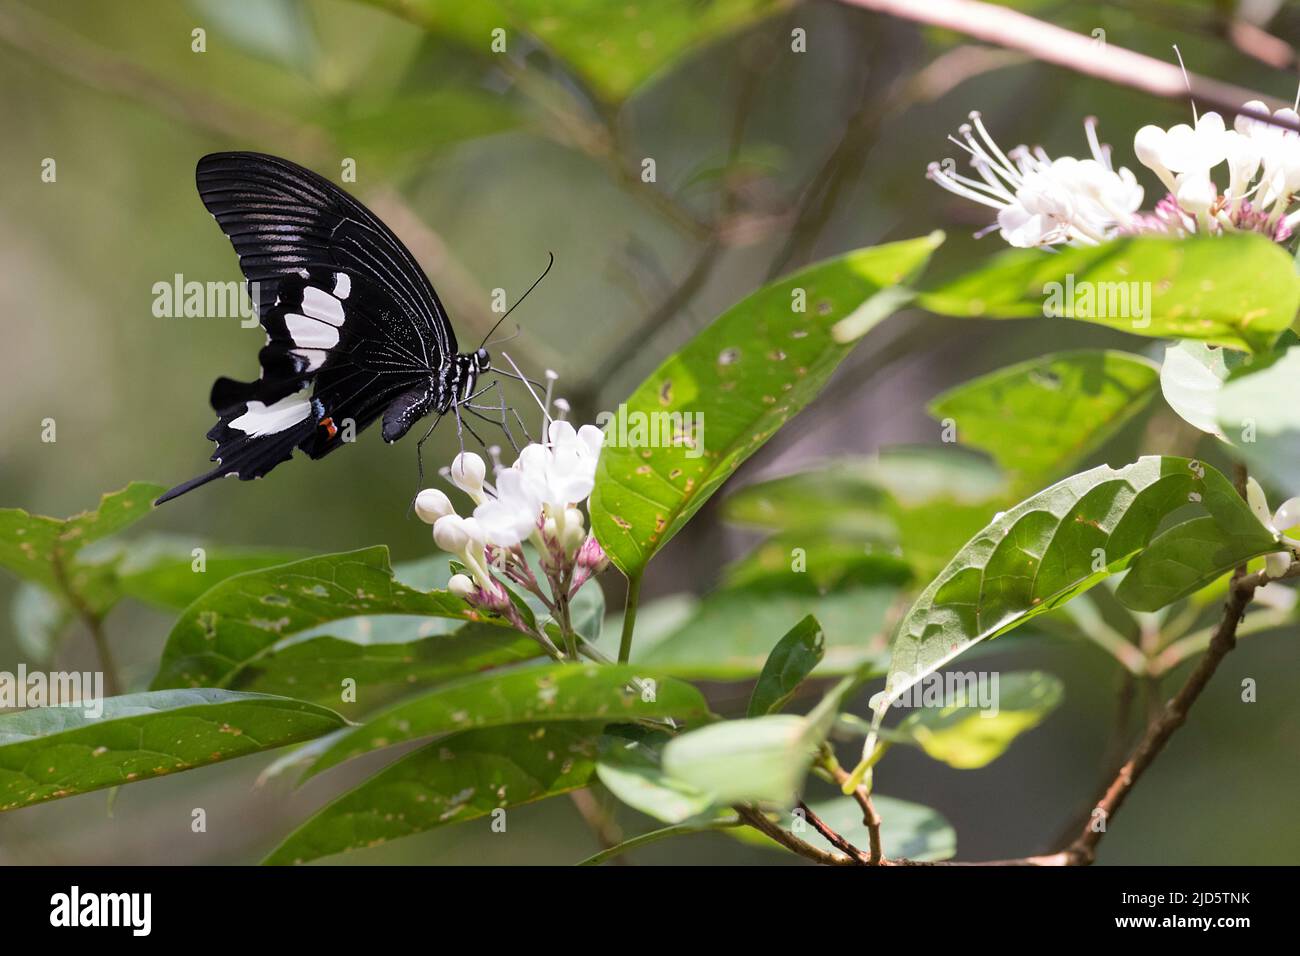 Swallowtail butterfly (Papilio sp.) from Tanjung Puting National Park, Kalimantan, Borneo, Indonesia. Stock Photo